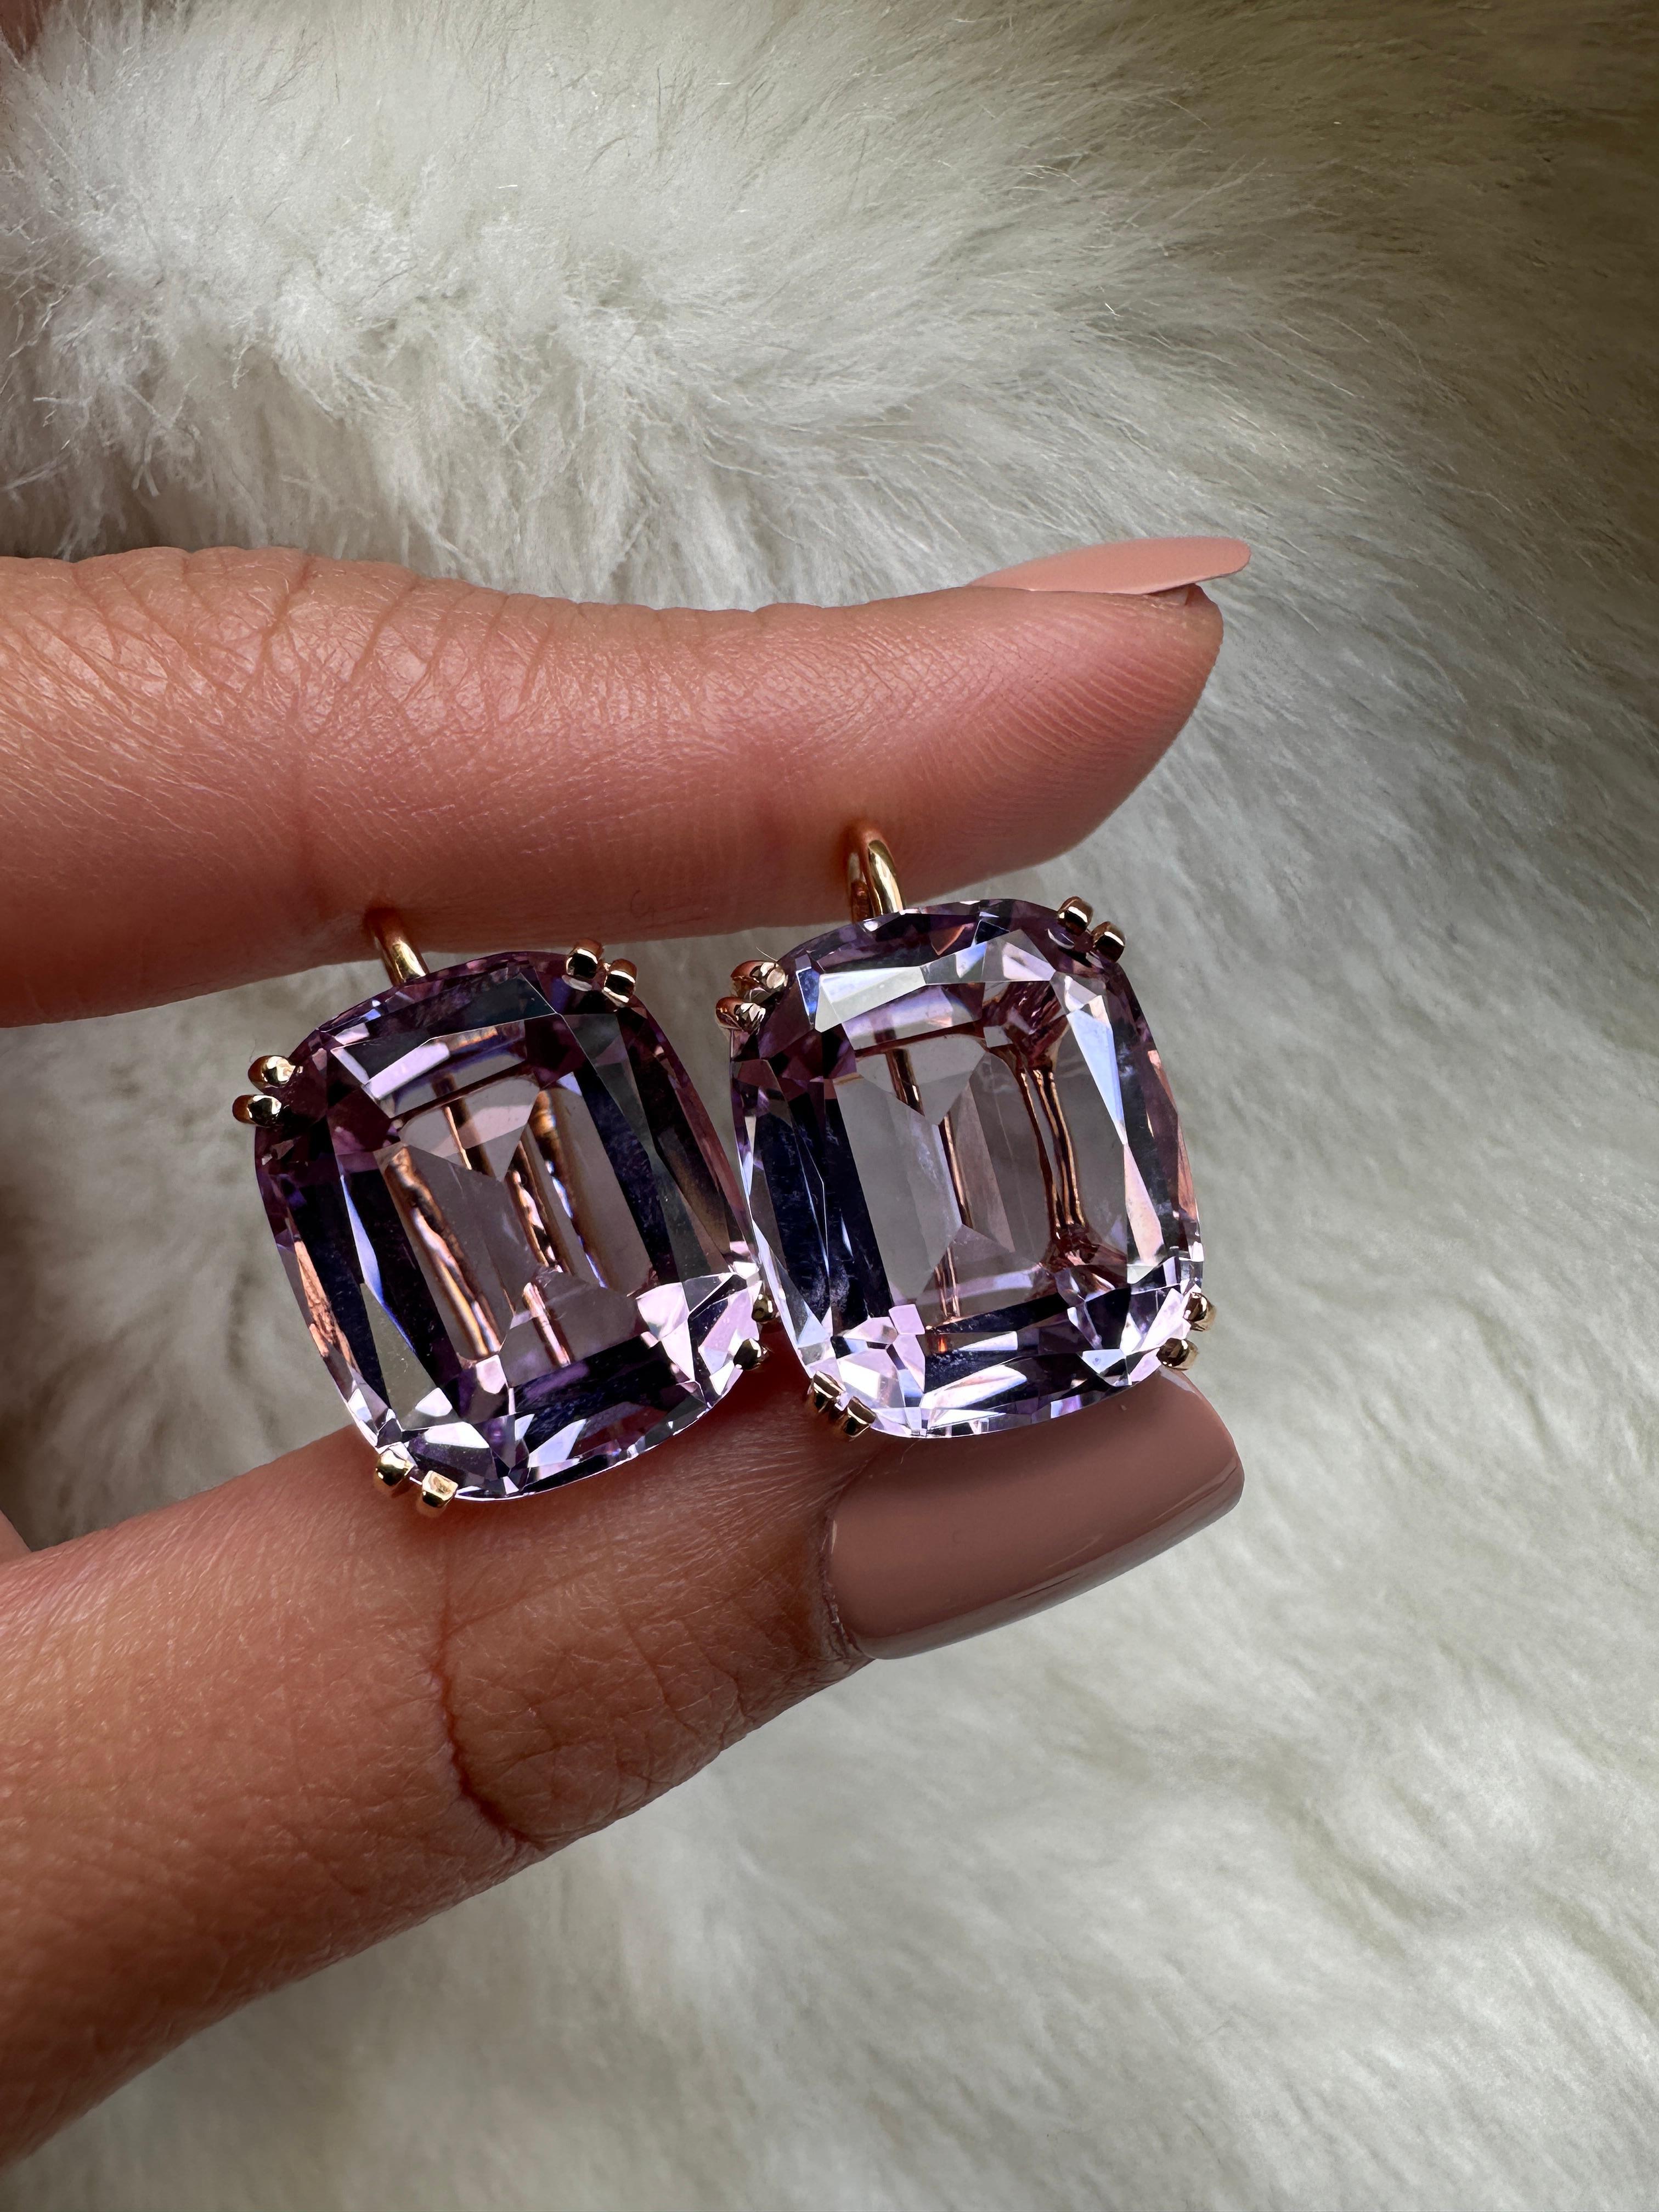 These Lavender Amethyst Cushion Earrings on Wire, are a distinct piece of our 'Gossip' Collection. These earrings are crafted with captivating lavender amethyst stones in a classic cushion-cut design. Delicately hanging from a wire, they present a